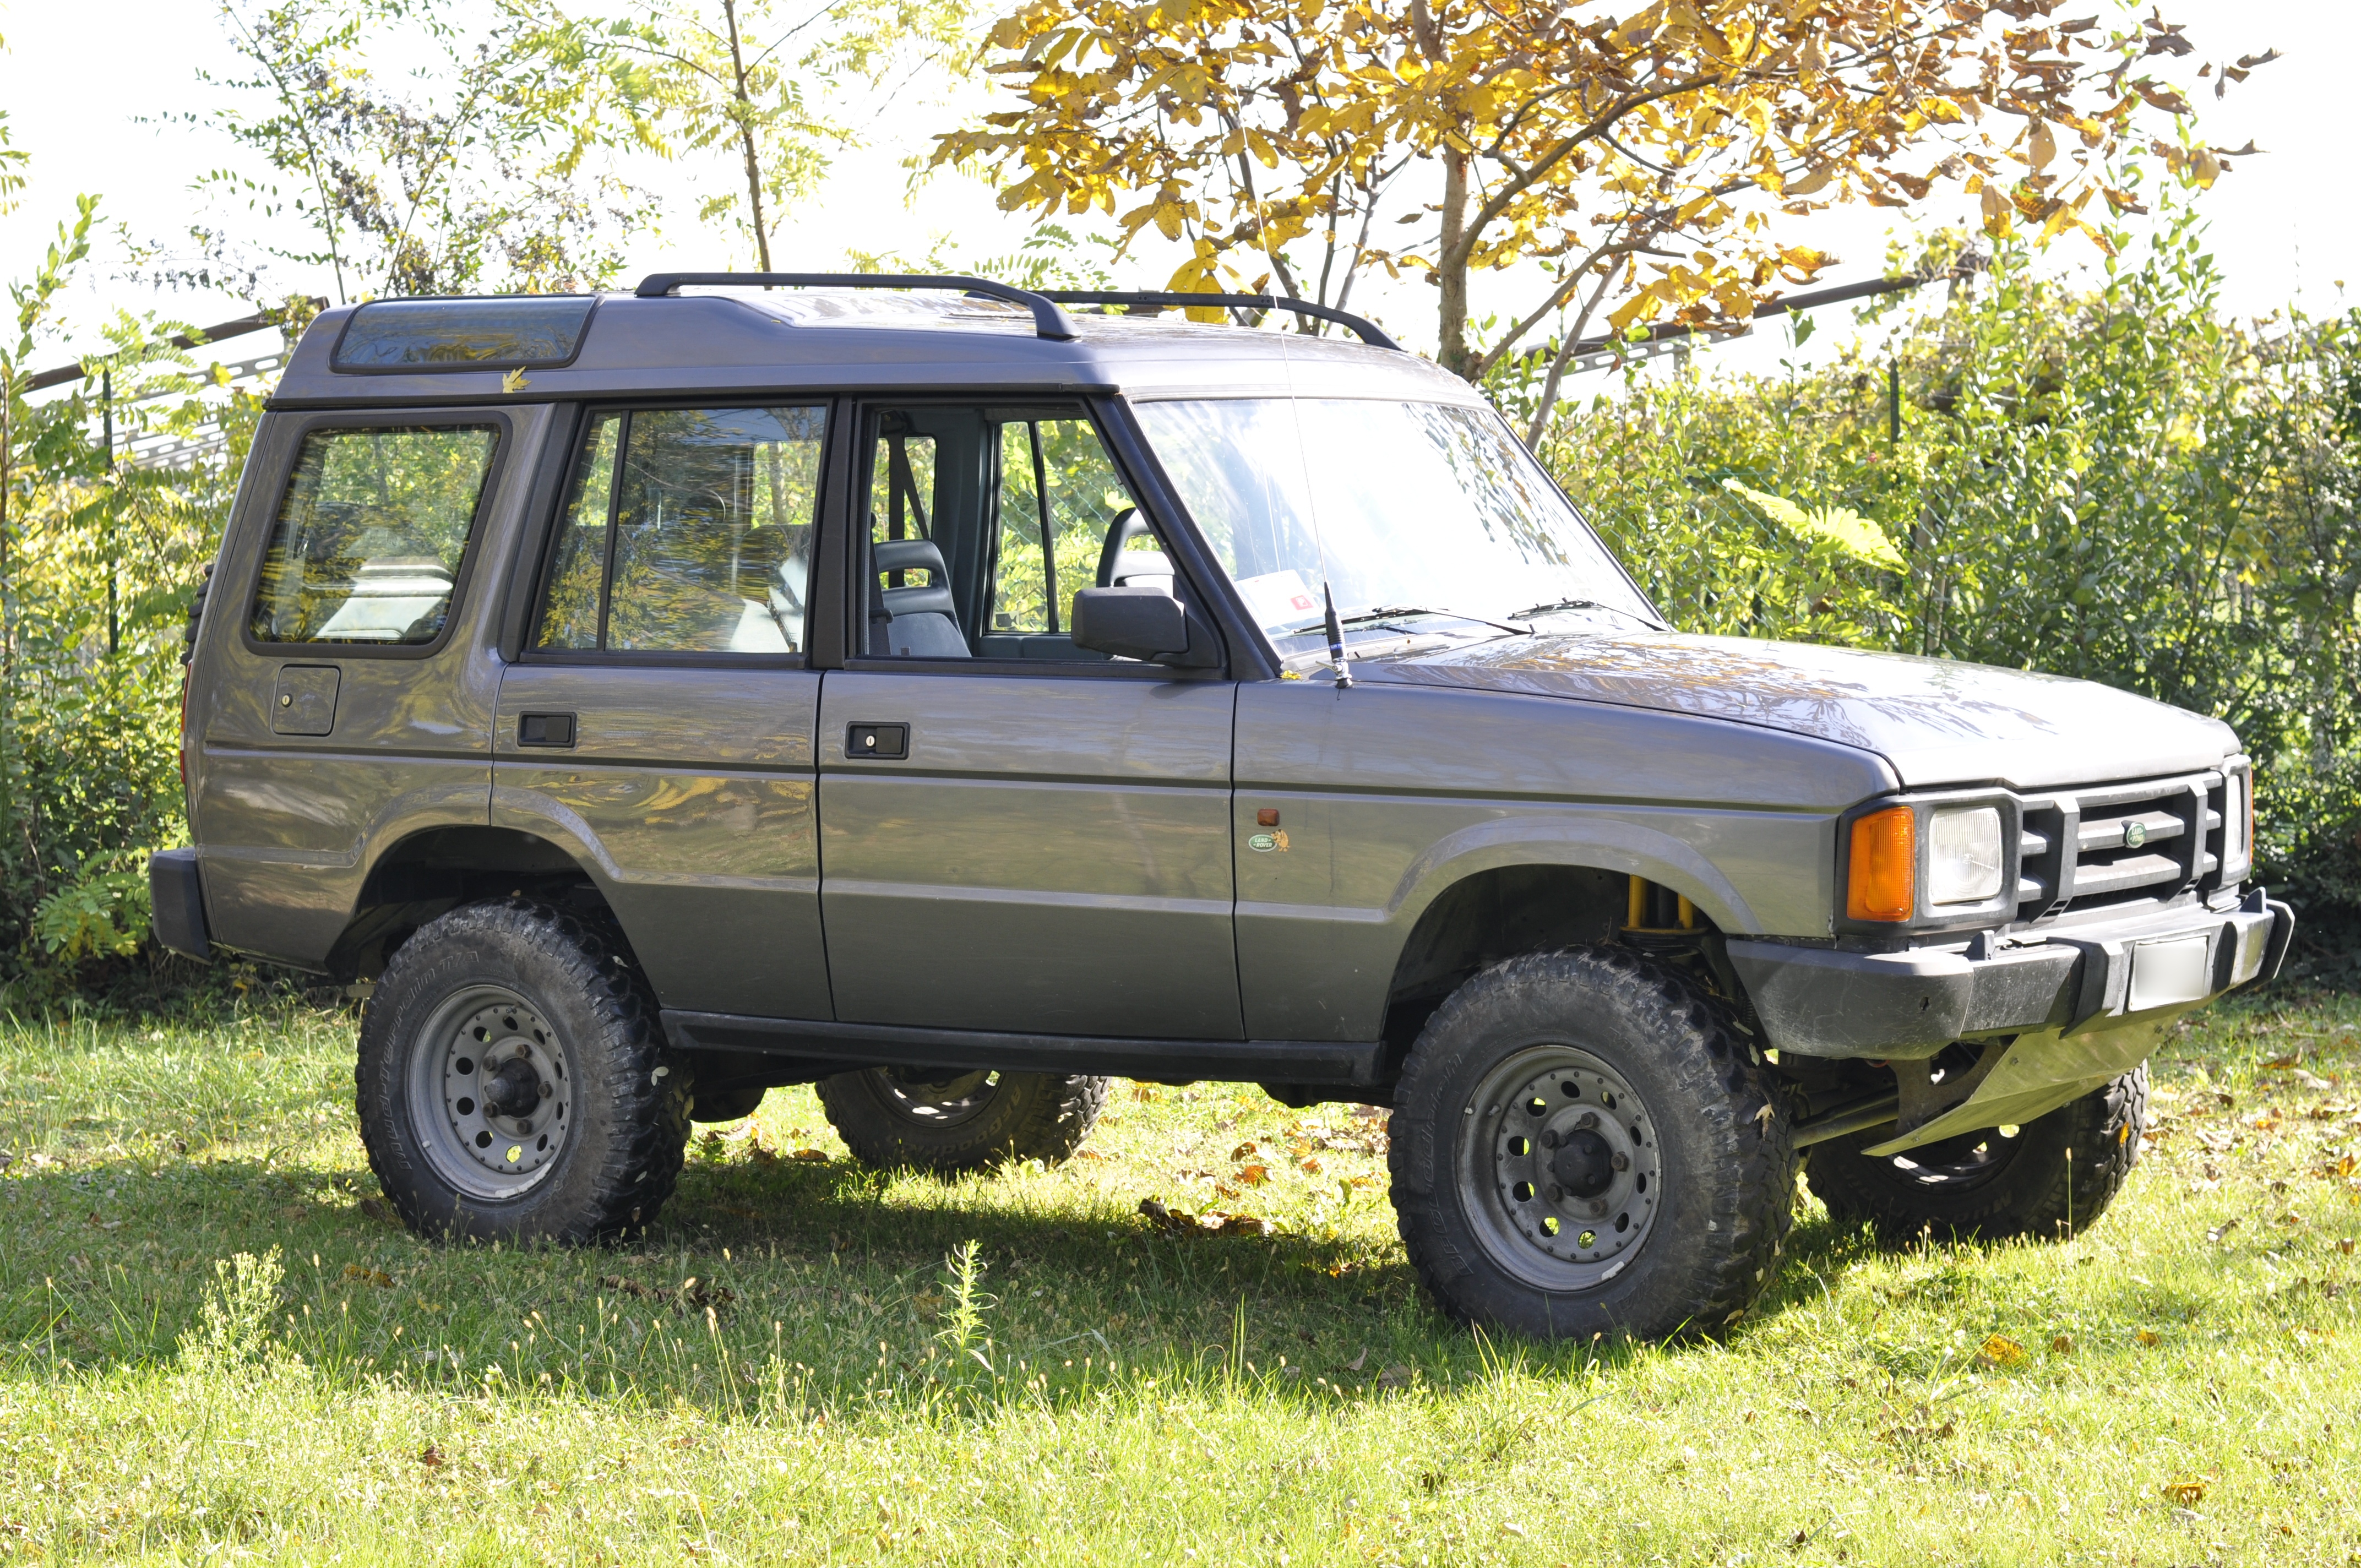 DSC9357 Land Rover Discovery 200 TDi Photo album by Jstrang